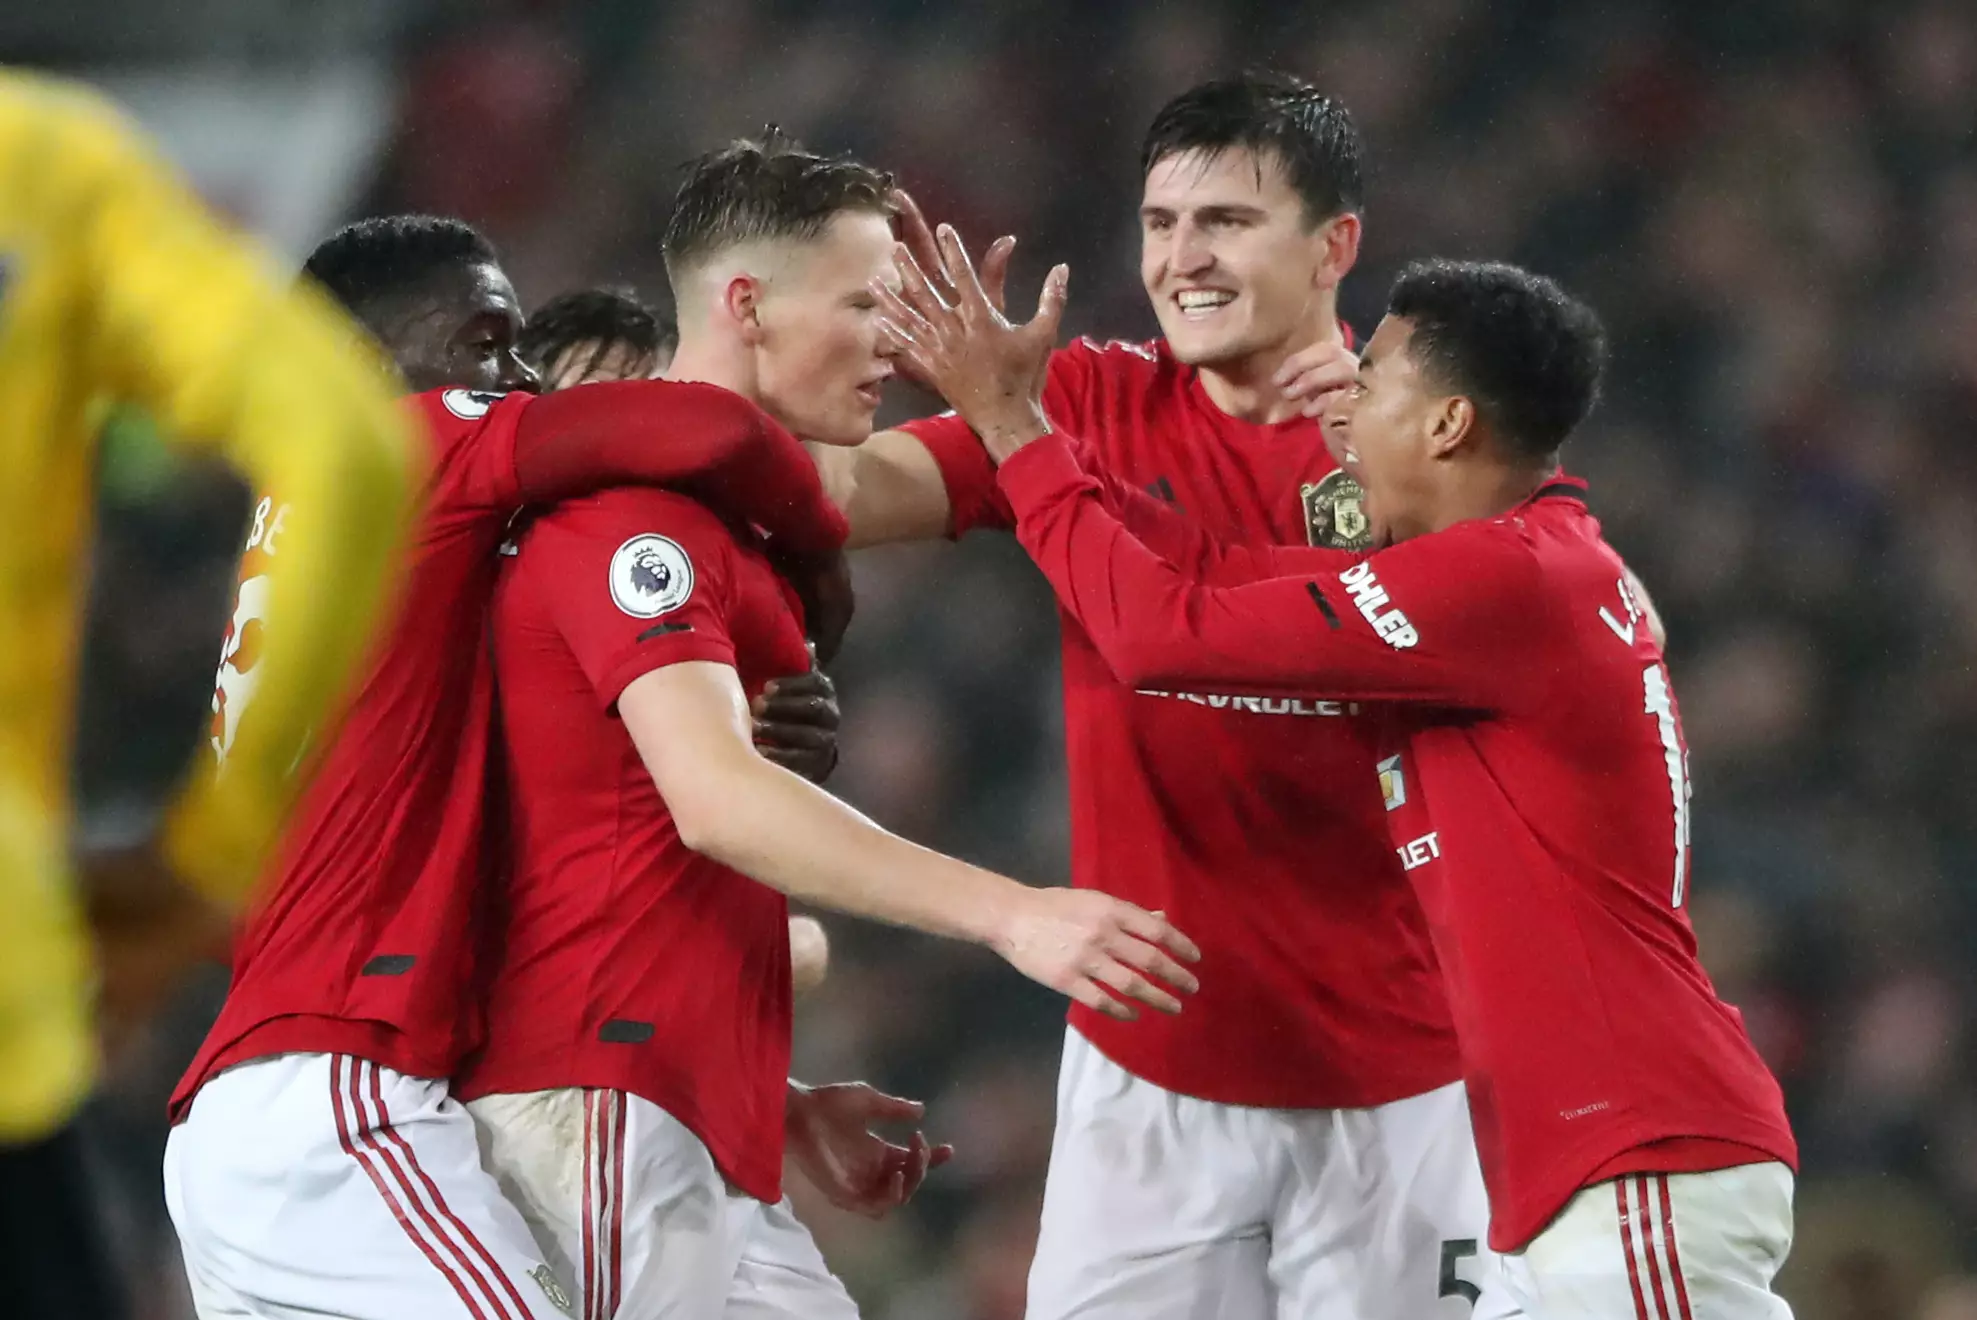 There was little in terms of excitement until McTominay's strike. Image: PA Images